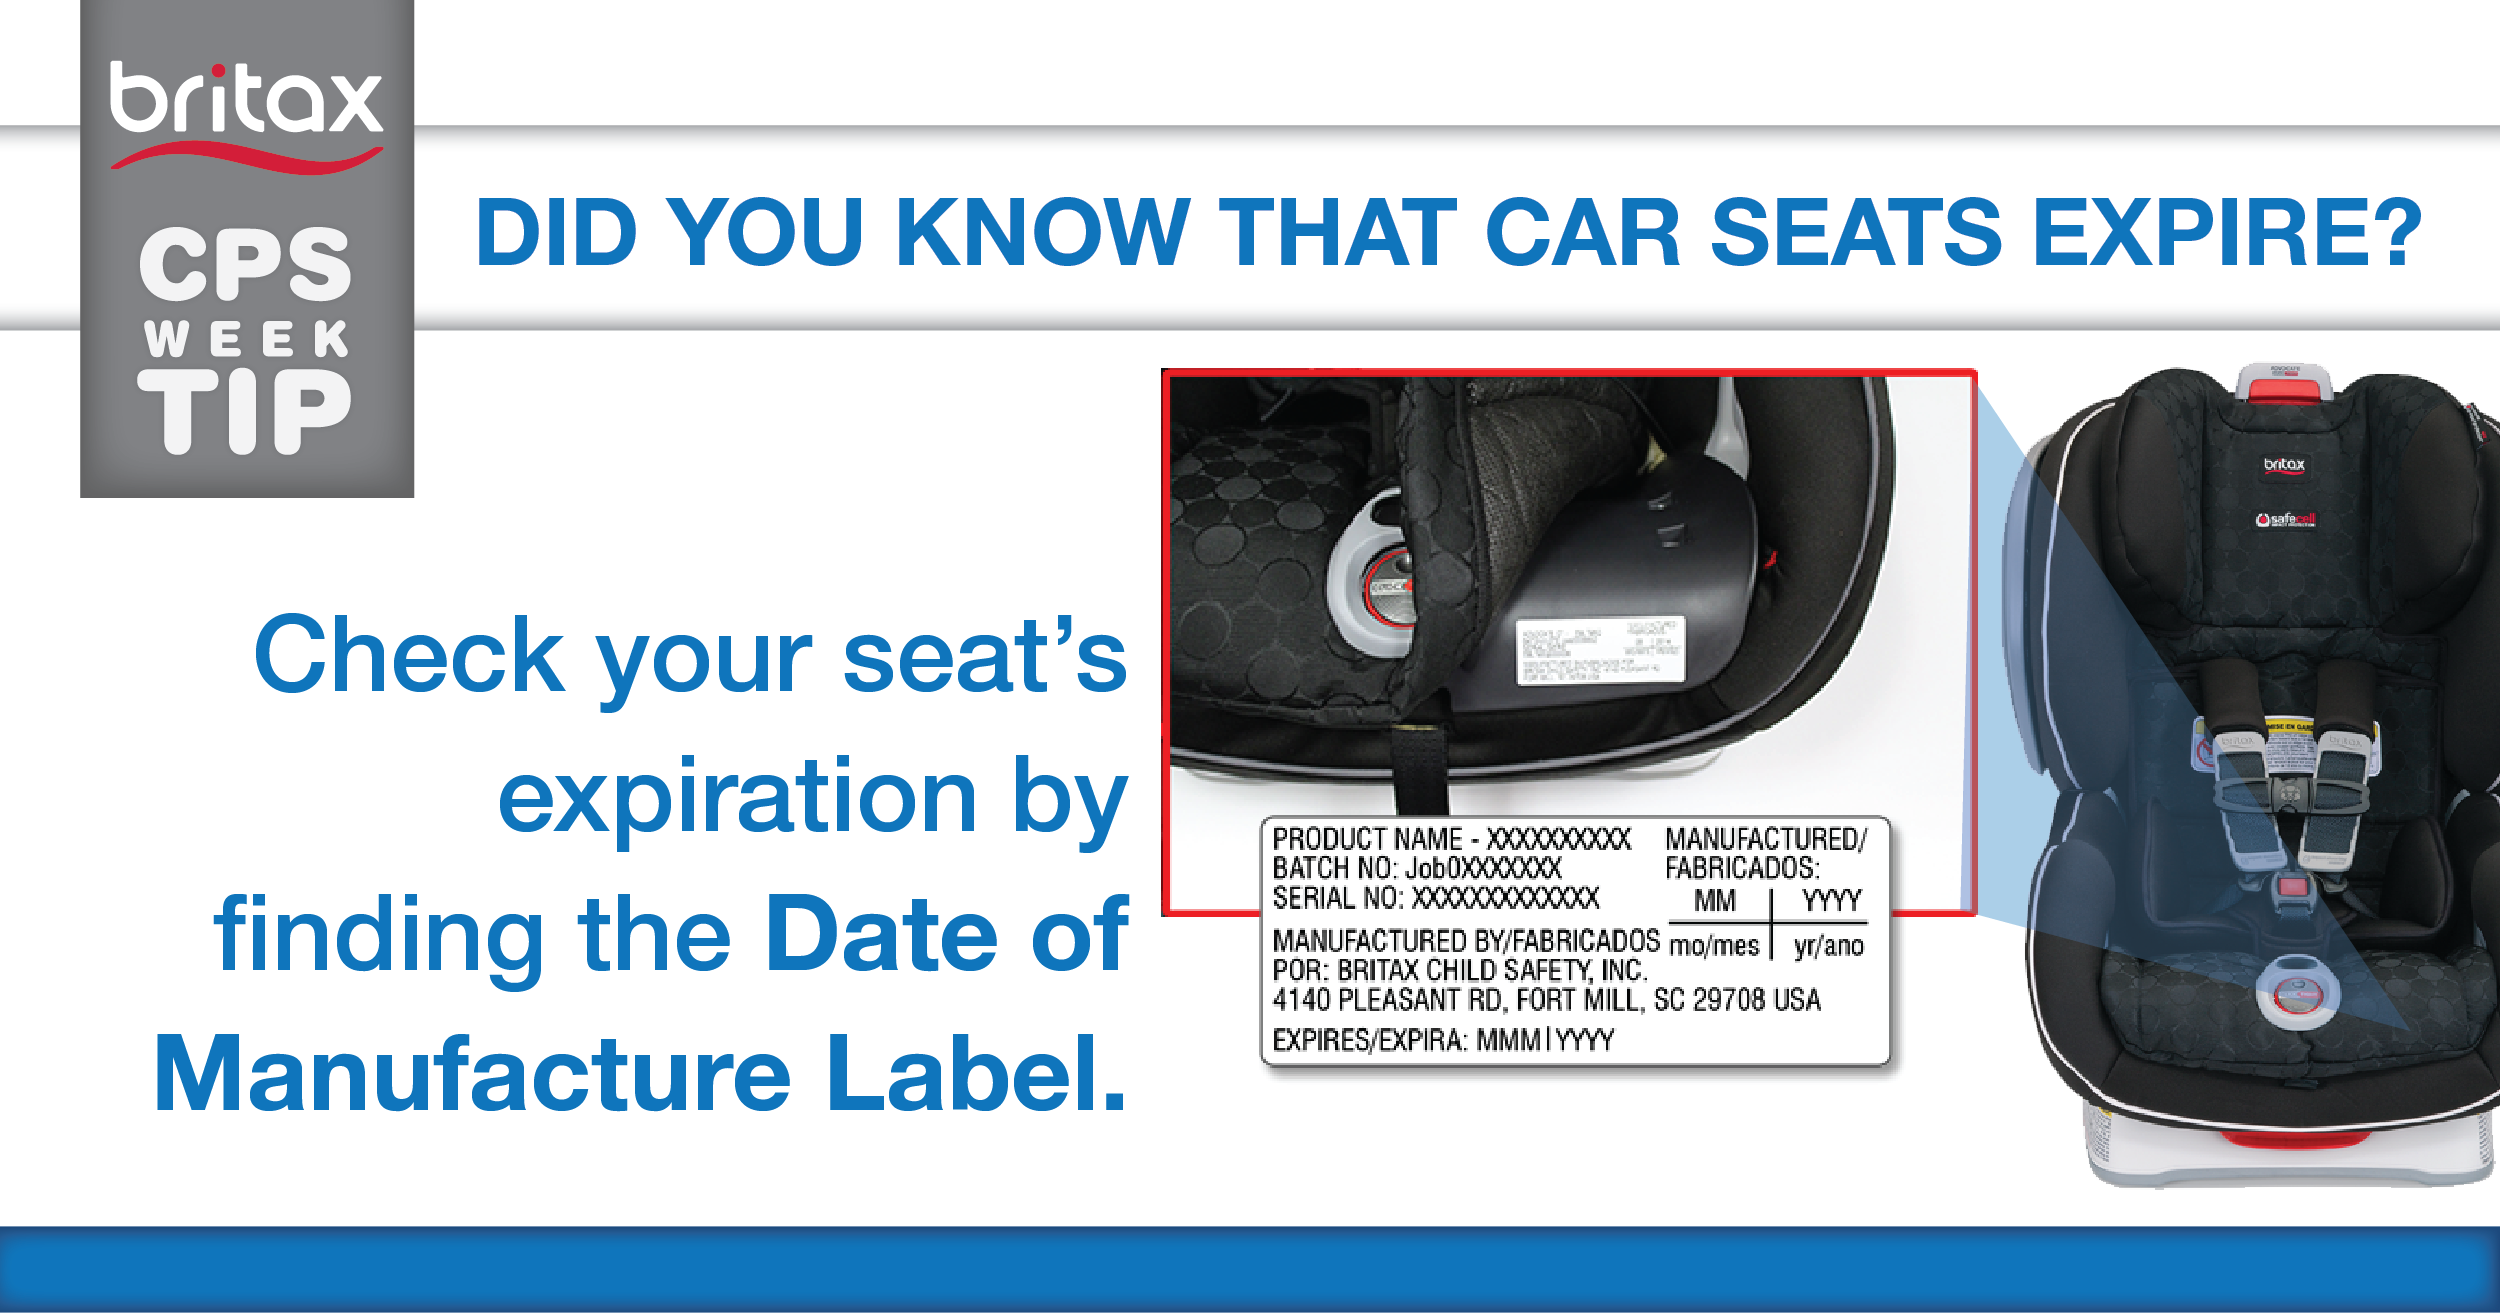 Car Seat Expiration Dates, How To Check Britax Car Seat Expiration Date